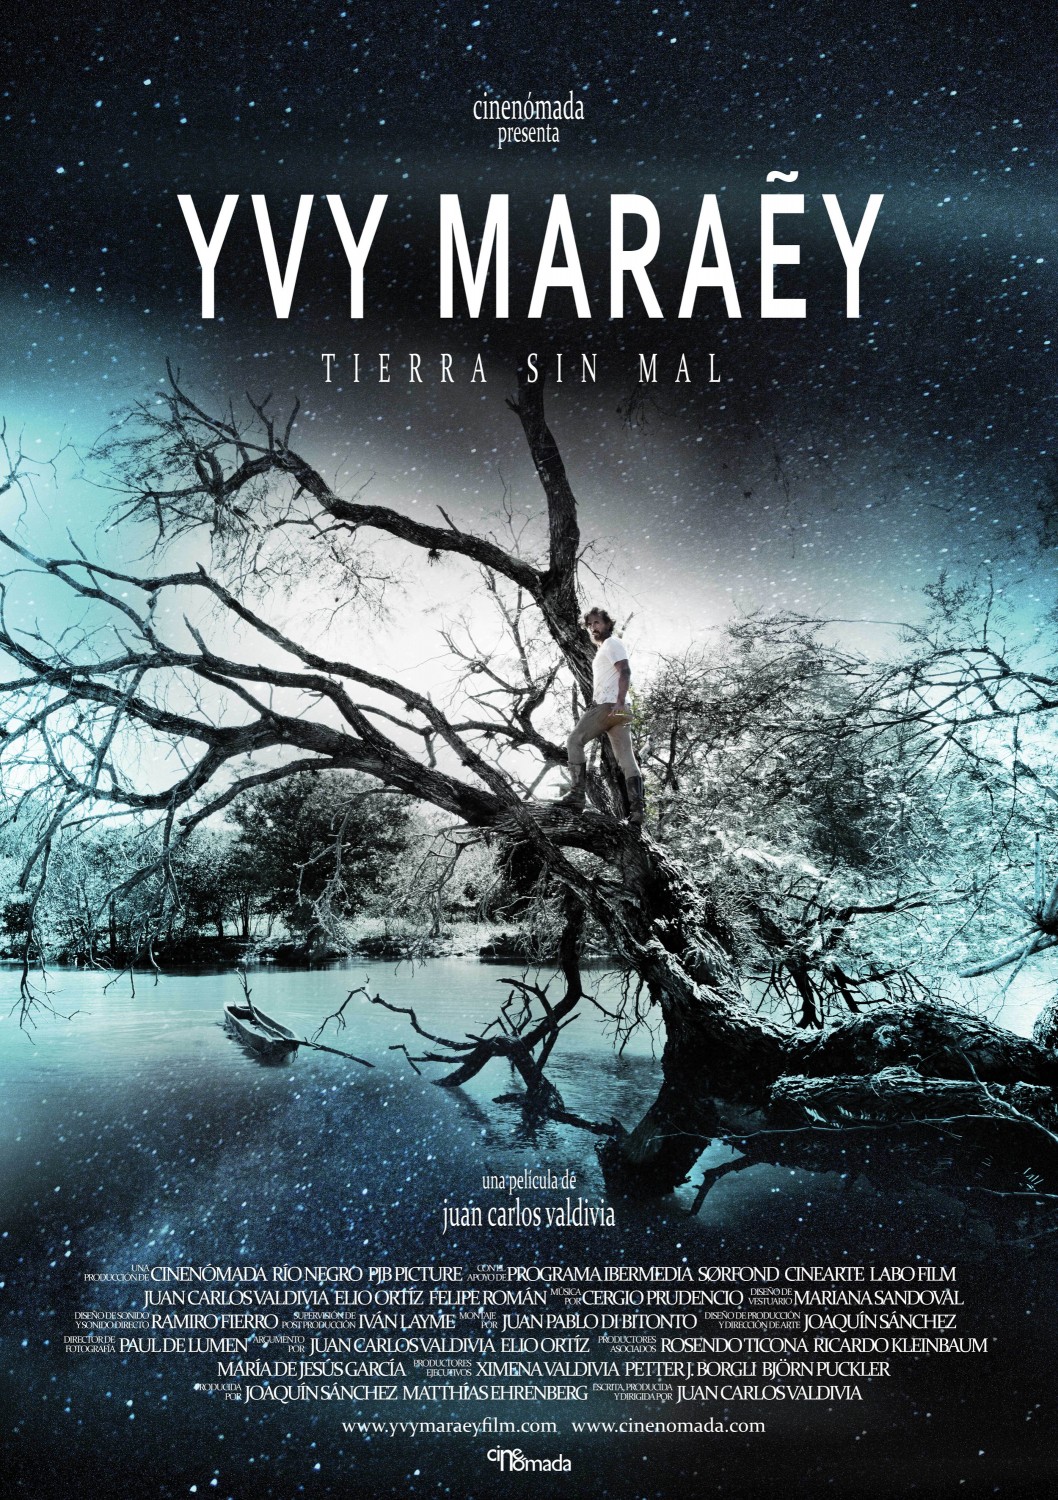 Extra Large Movie Poster Image for Yvy Maraey 